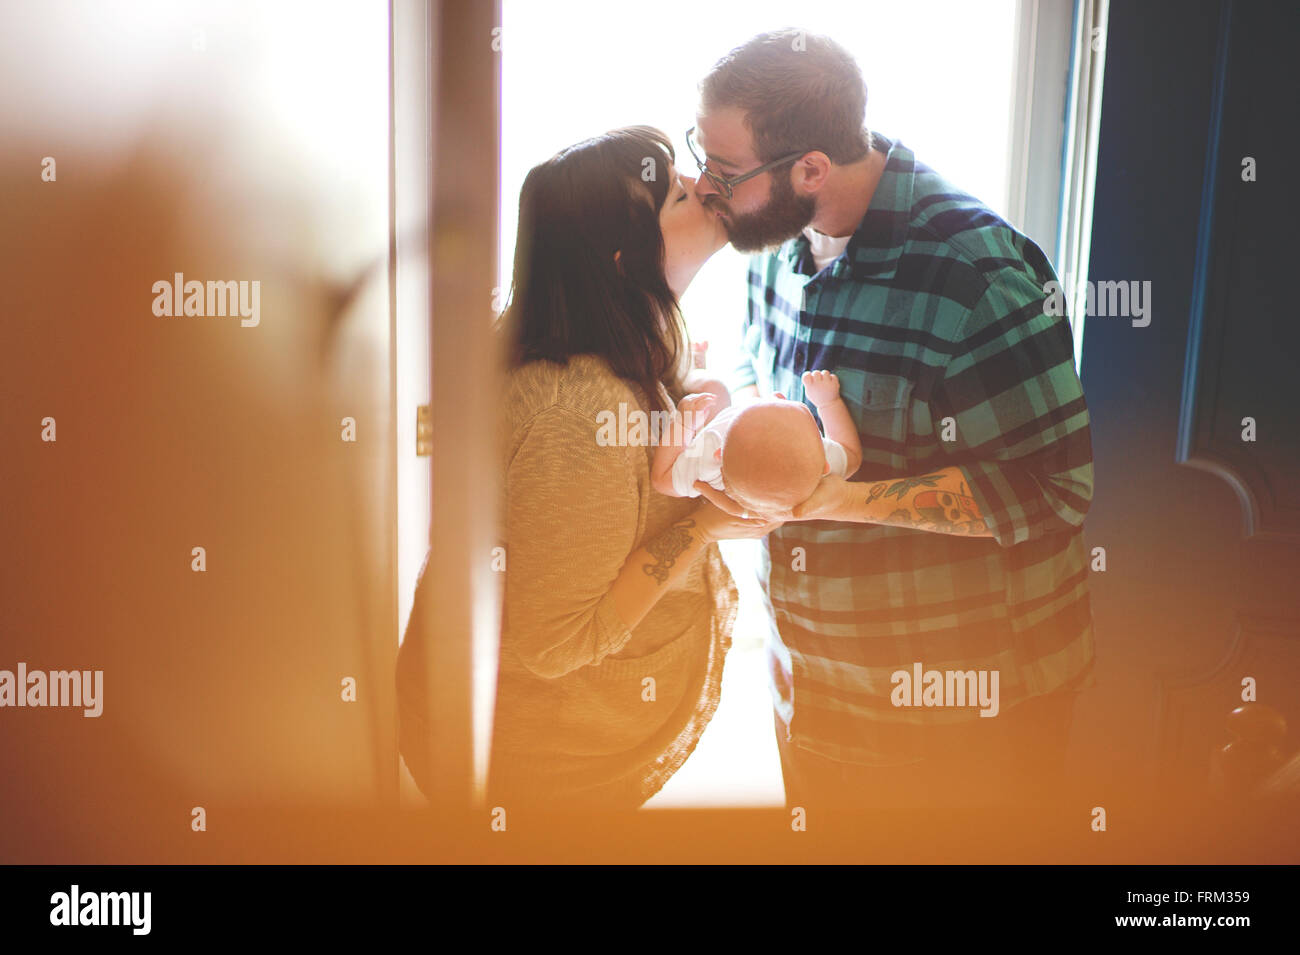 Husband and wife kiss while holding new baby Stock Photo